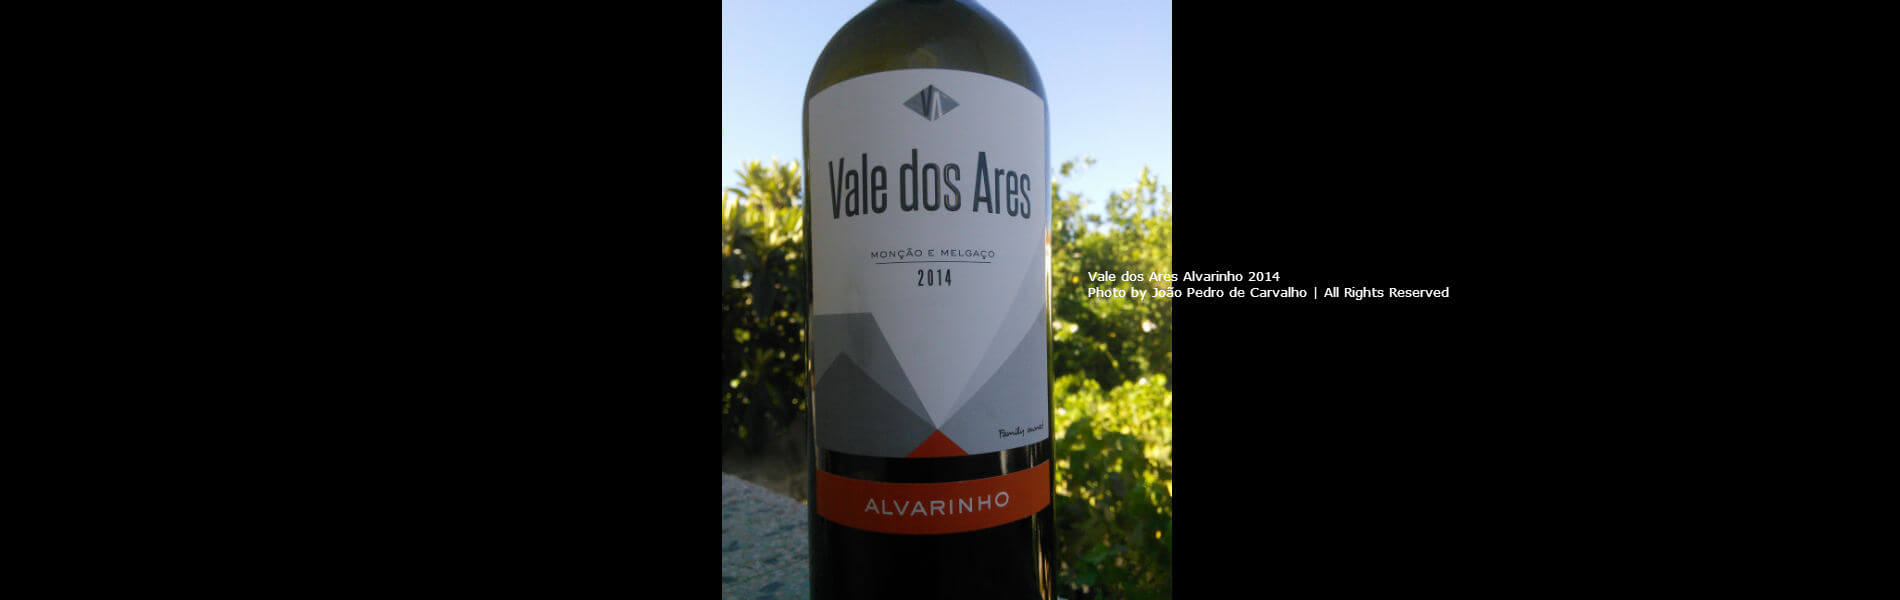 Blend-All-About-Wine-Vale-dos-Ares-2014-Slider